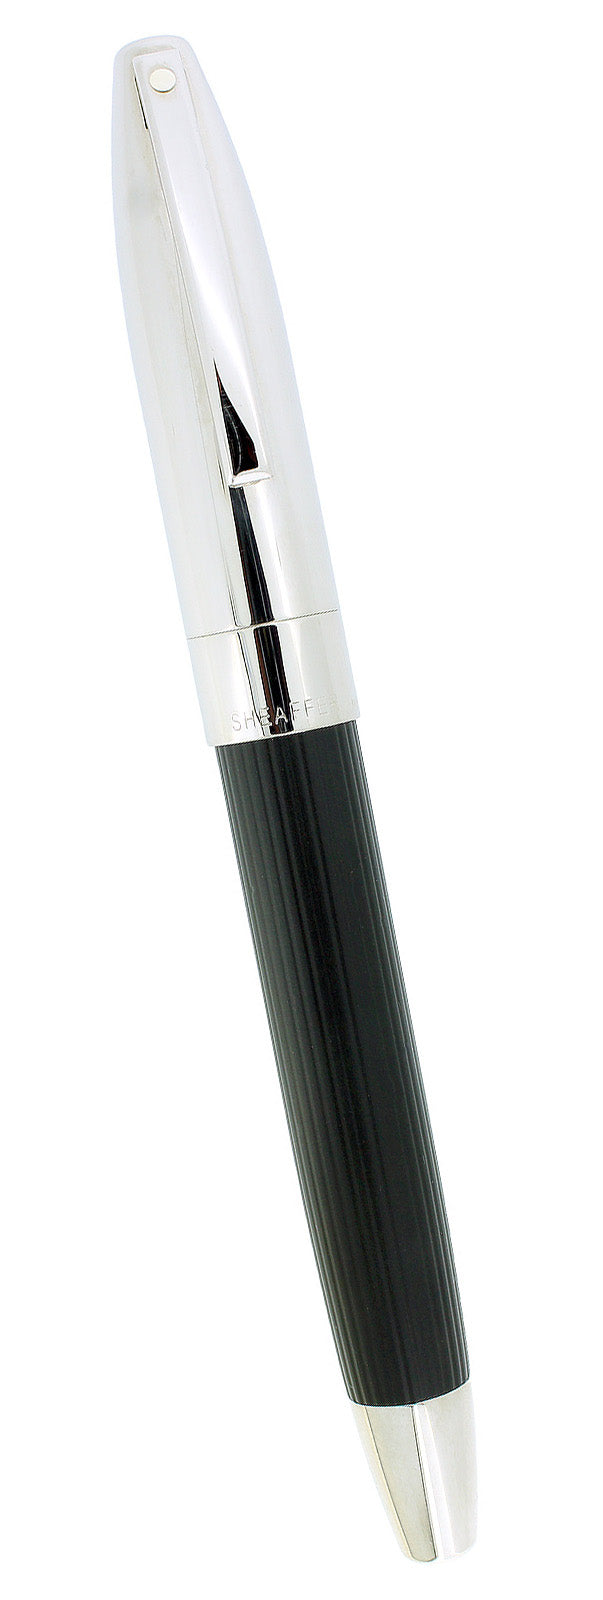 CIRCA 1999 SHEAFFER LEGACY 2 LINEAR BLACK & PALLADIUM ROLLERBALL PEN OFFERED BY ANTIQUE DIGGER